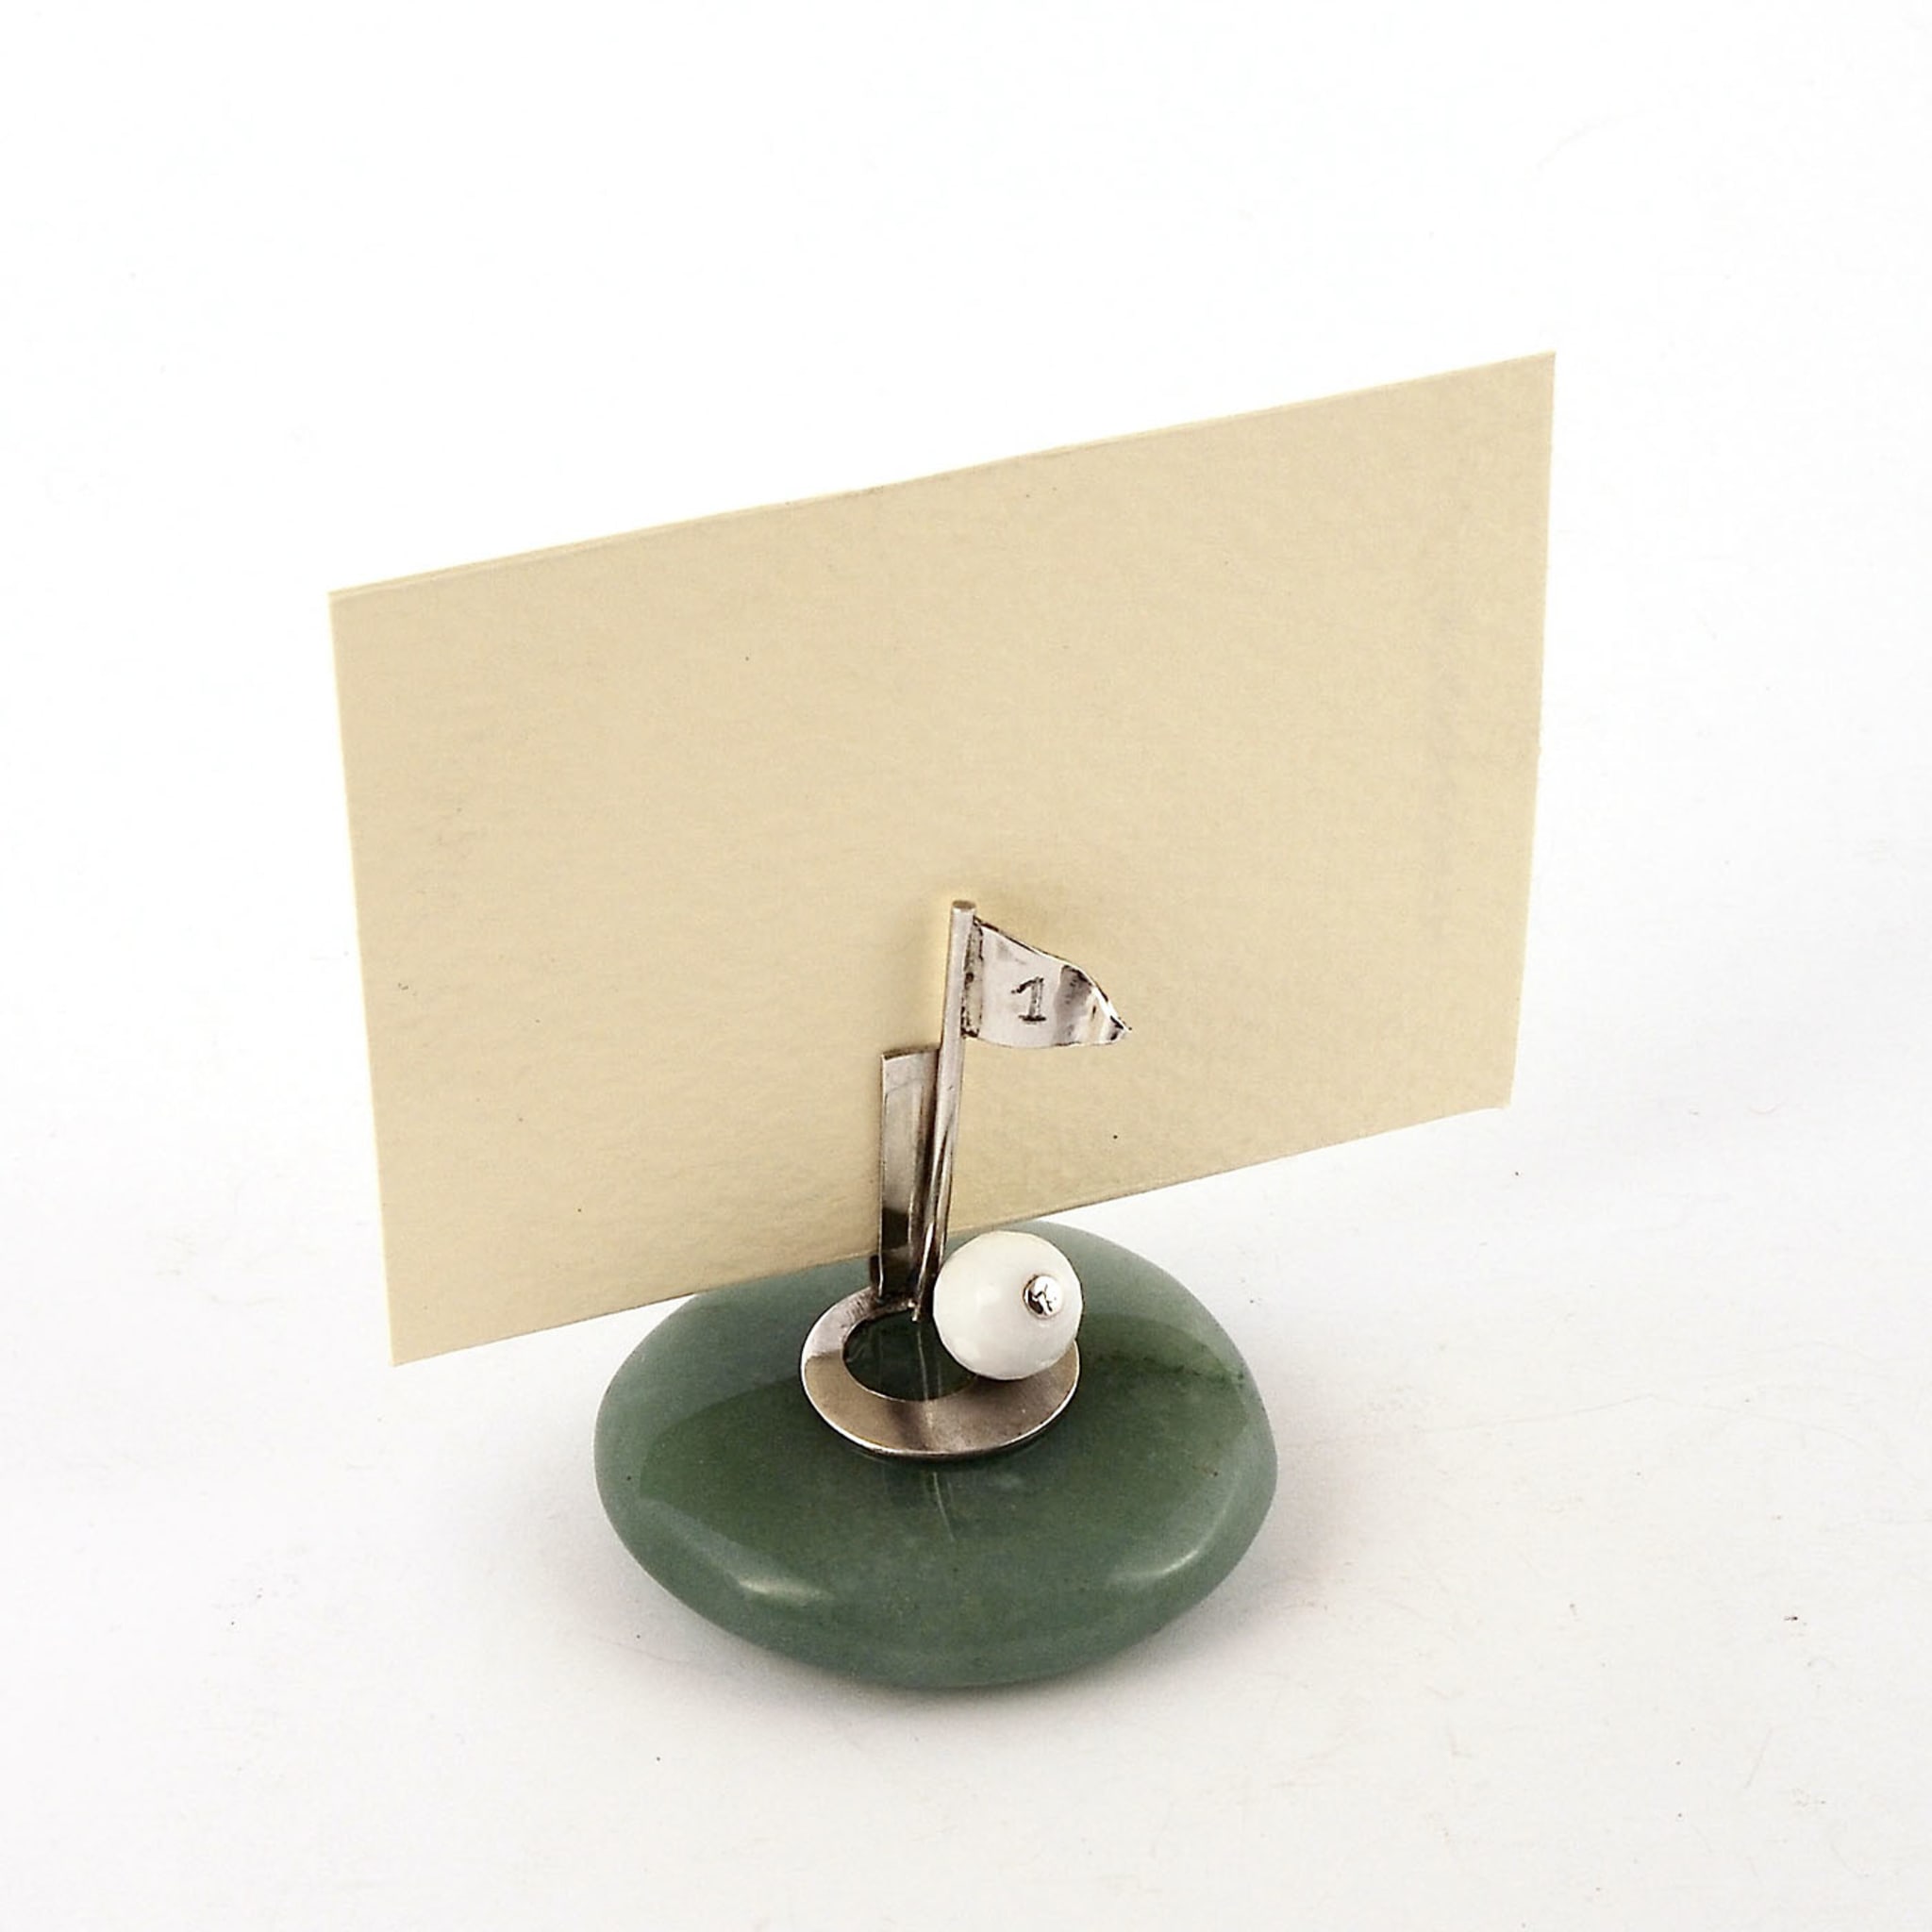 Set of 4 Golf Place Card Holders - Alternative view 2